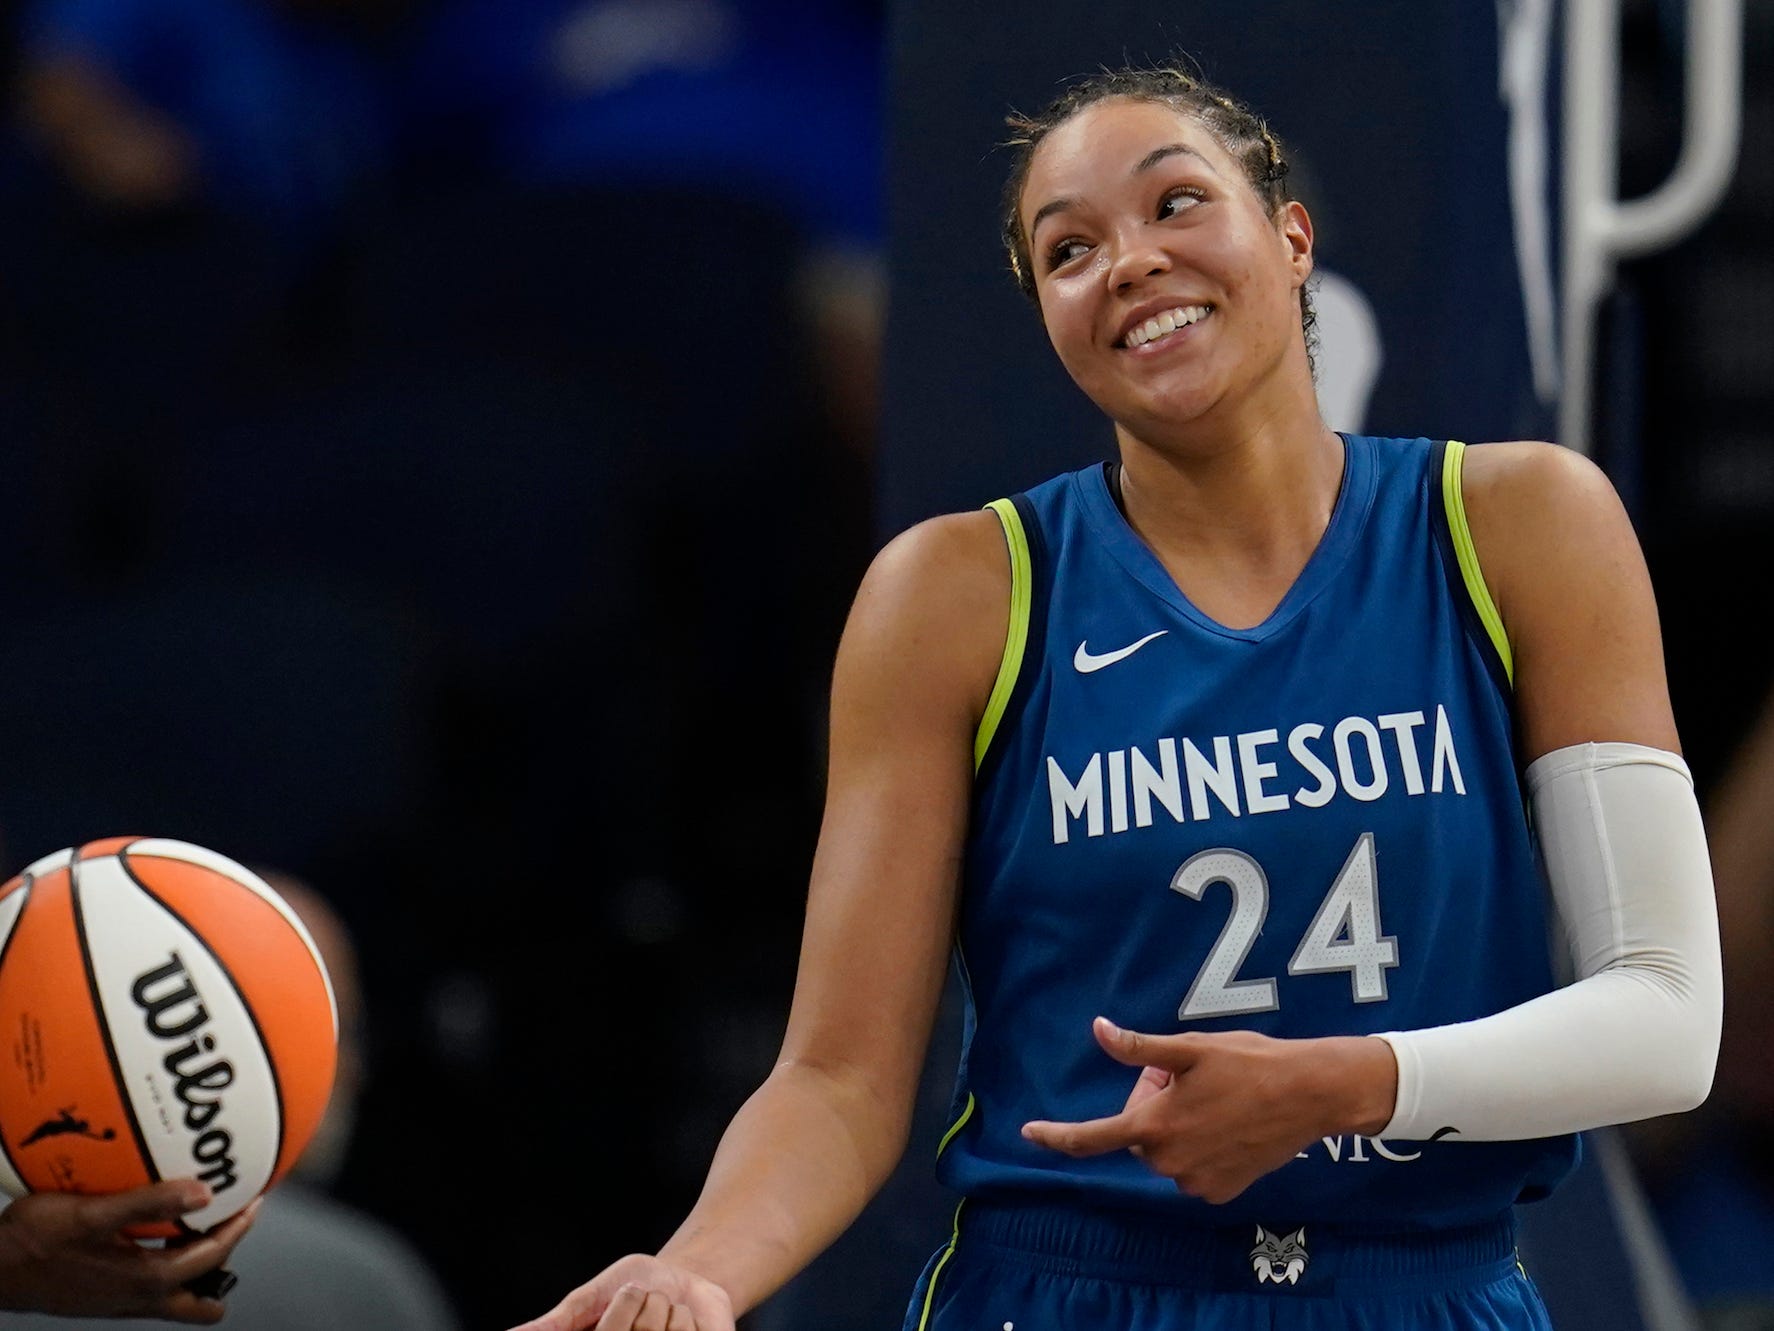 wnba salaries max out nearly $865k less than the nba's lowest contracts. players lean on side jobs and savvy financial strategies to fill the gap.